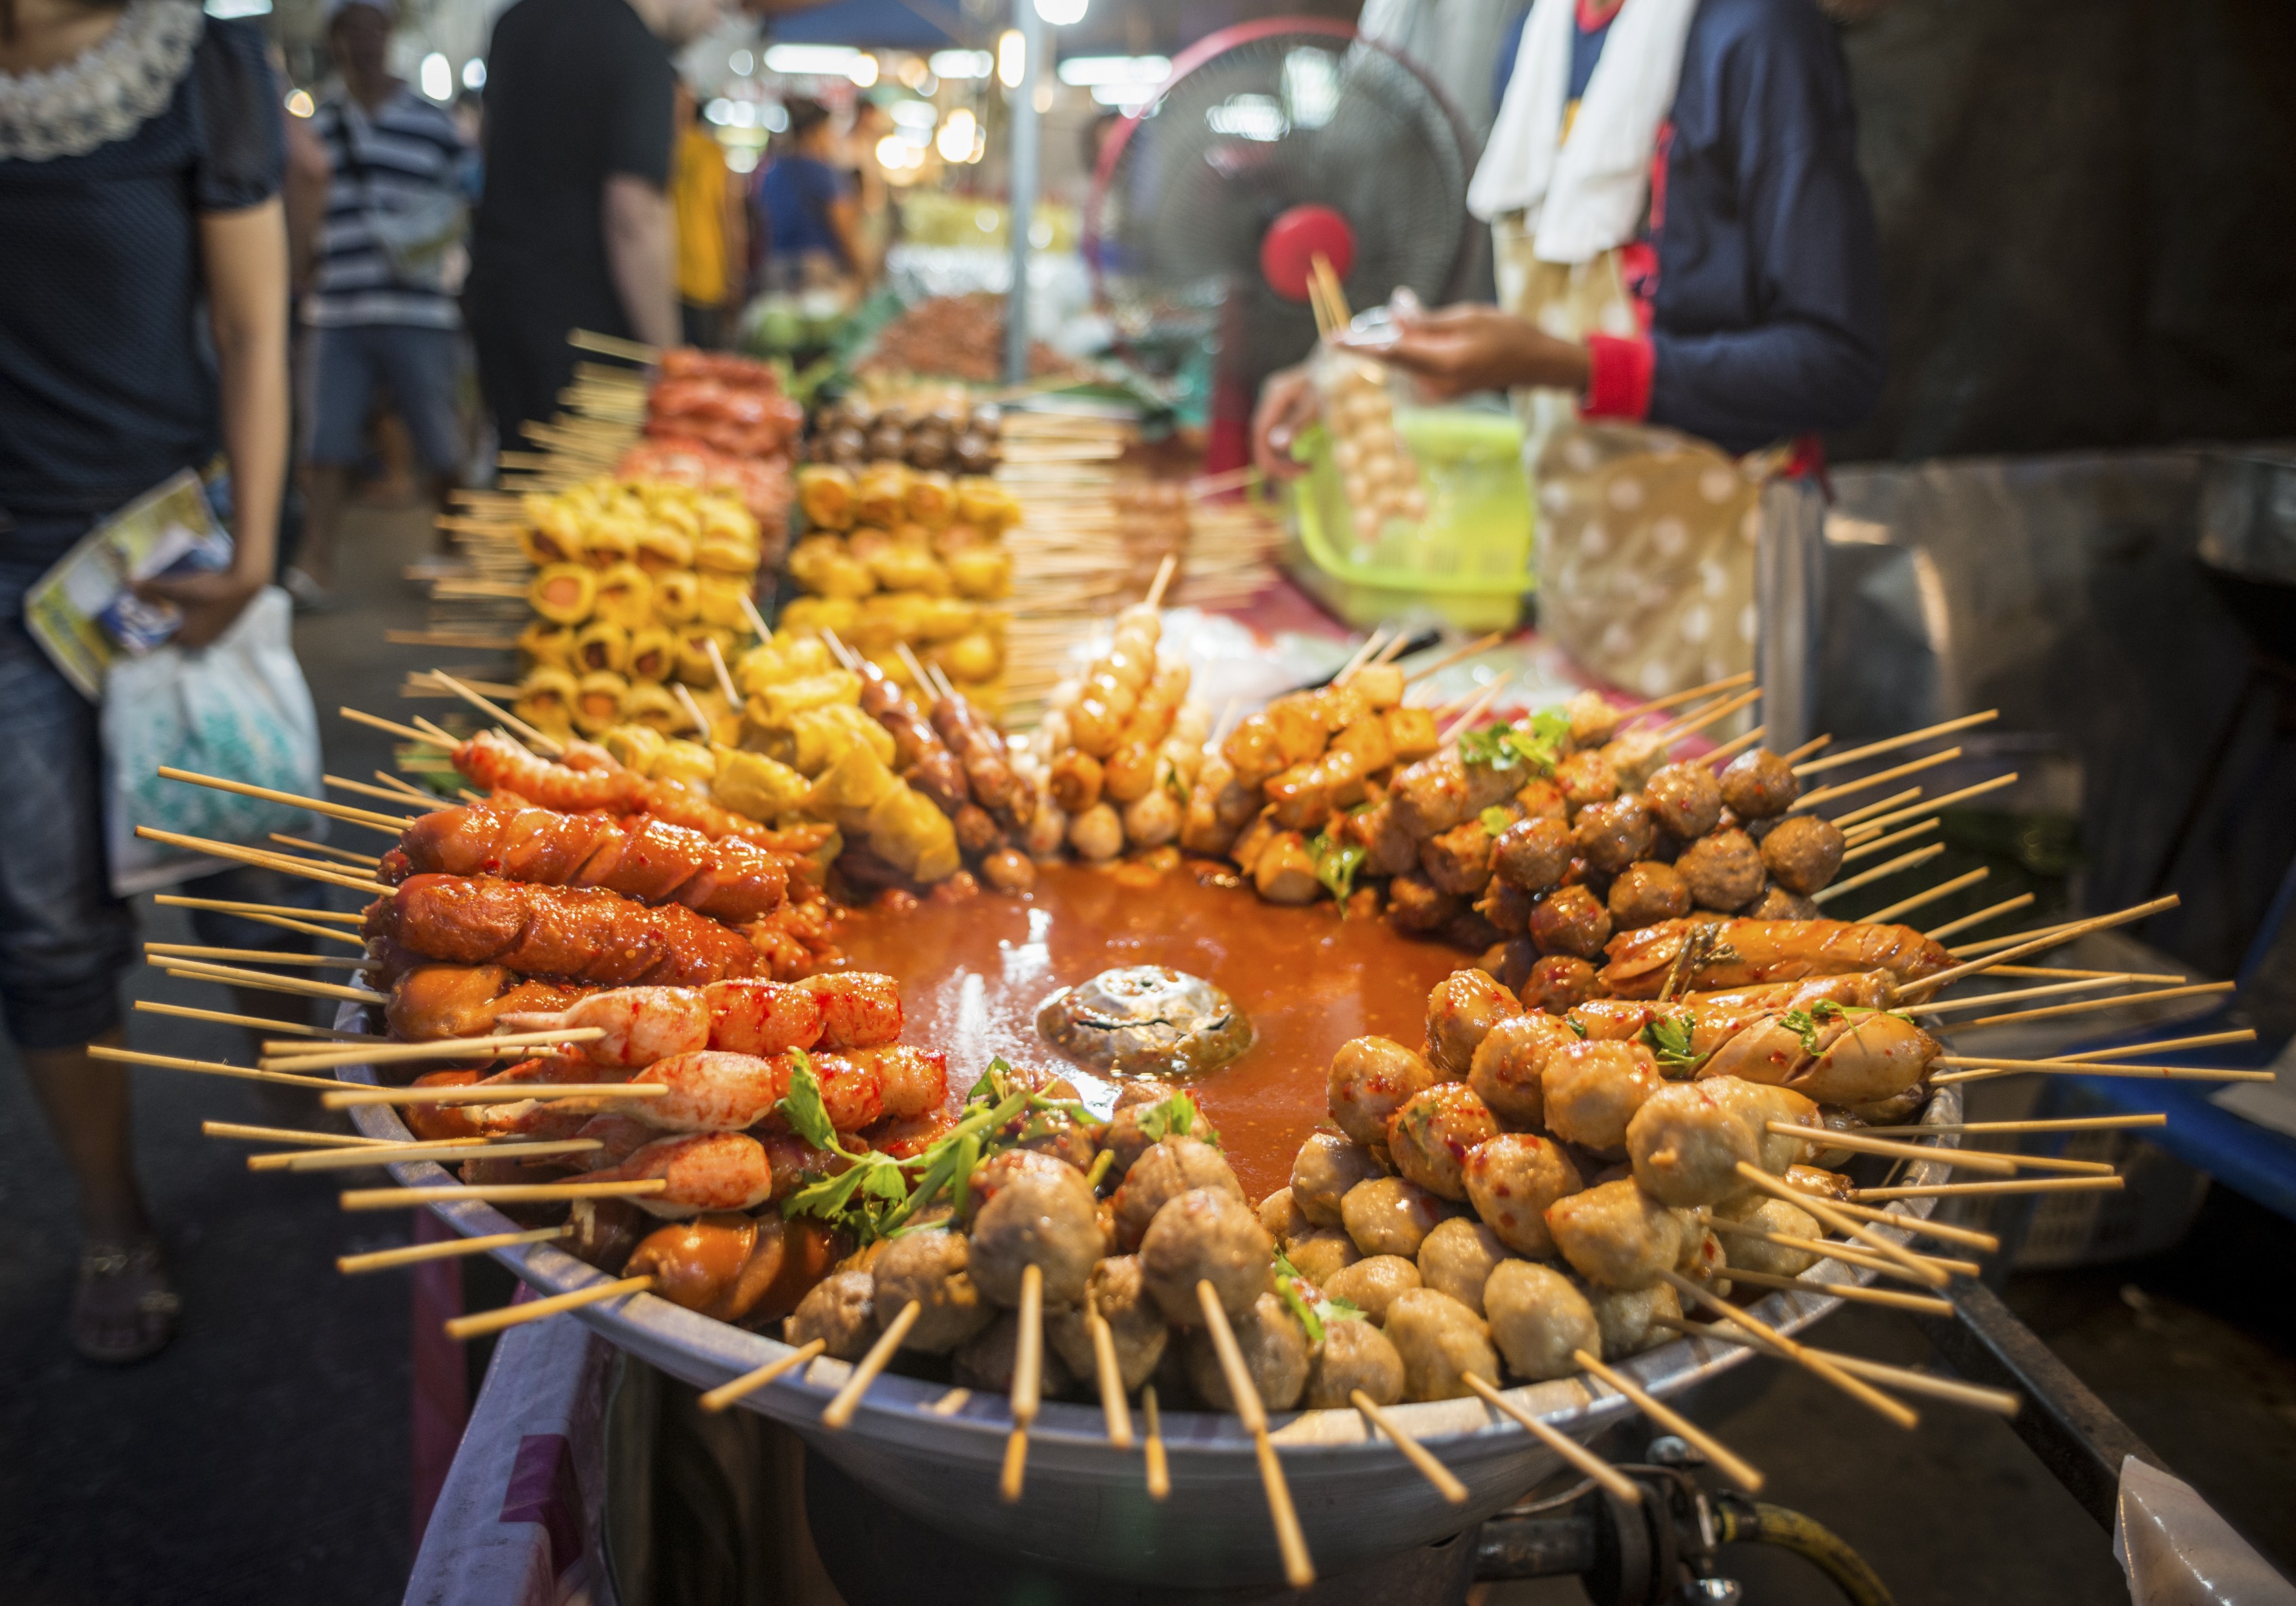 When the Bangkok Metropolitan Administration announced that it intended to purge the city’s streets of food vendors it stirred up a lot of anger. Photo: Shutterstock